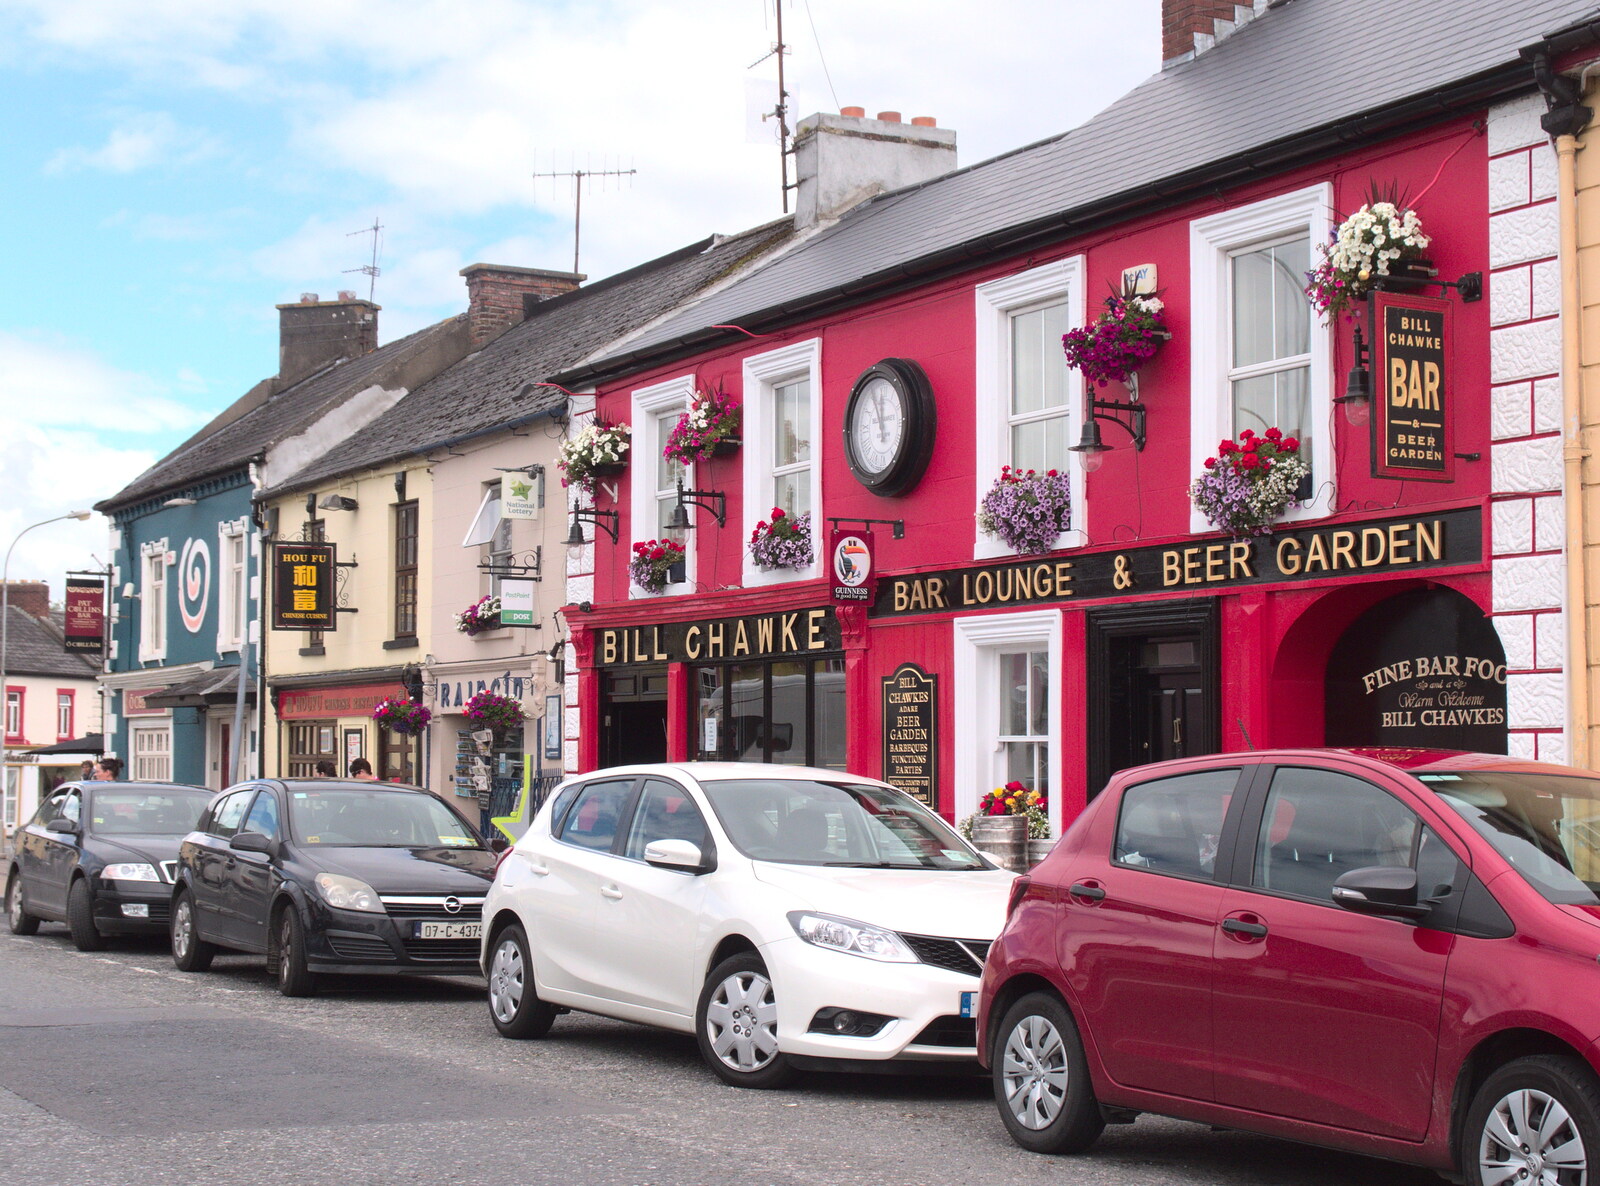 More brightly-coloured bars and shops in Adare from Surfing Achill Island, Oileán Acla, Maigh Eo, Ireland - 8th August 2017